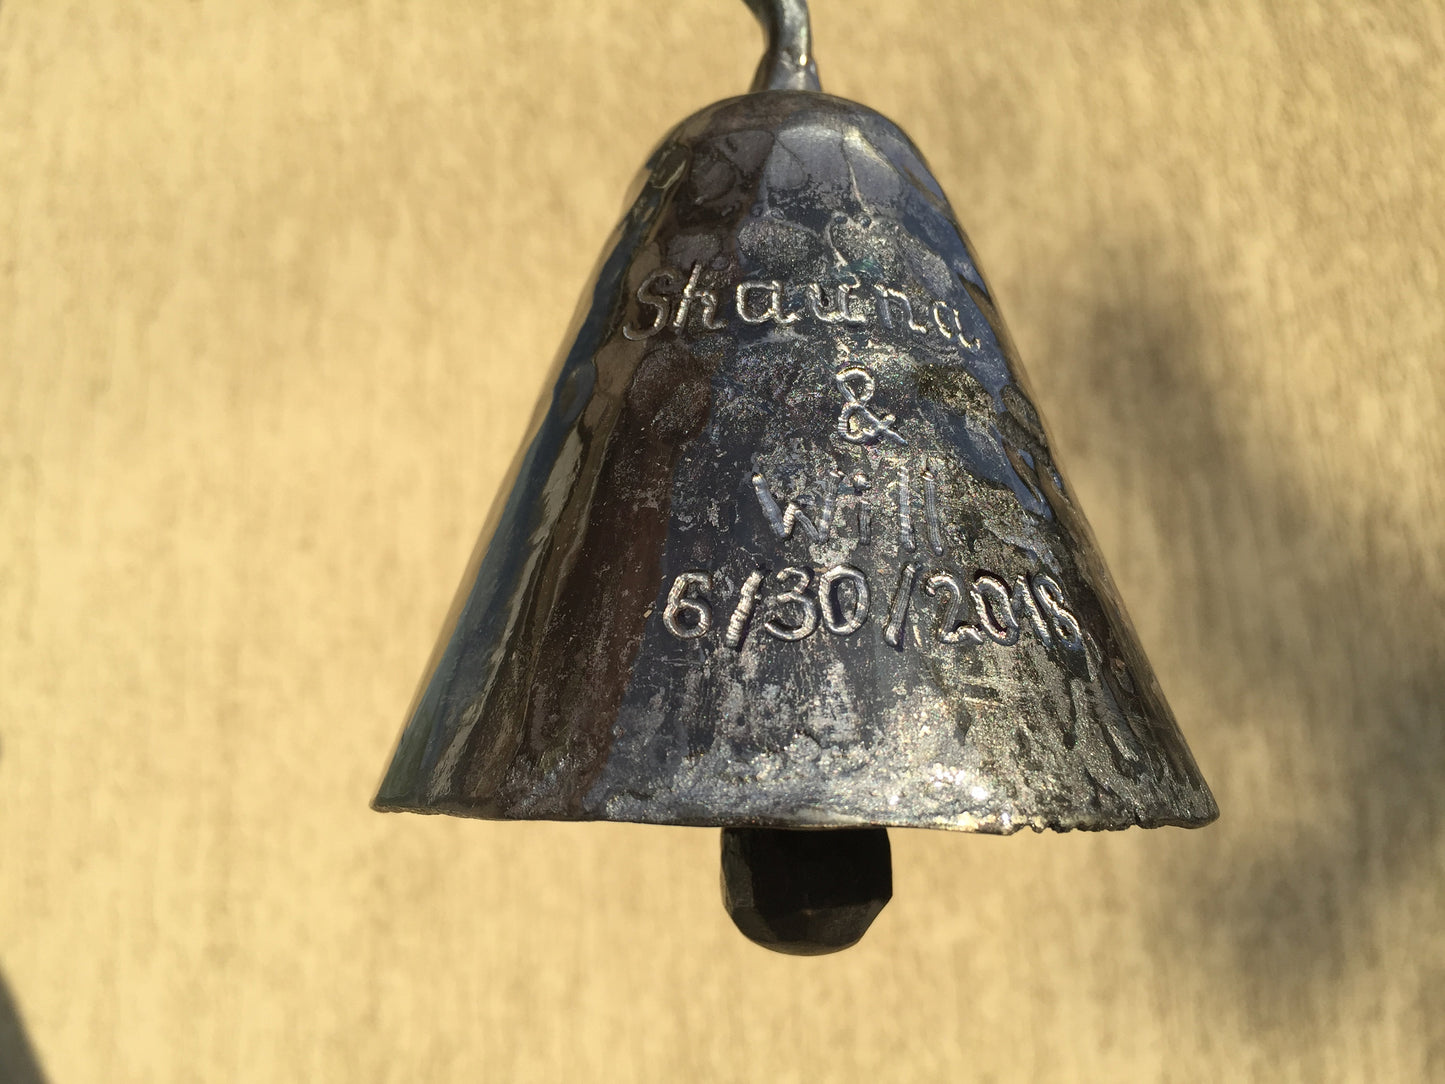 Engraved bell, hand made bells,wrought iron bell, metal bells,iron bells, metal art,metal gift, iron gift, birthday gift, metal sculpture